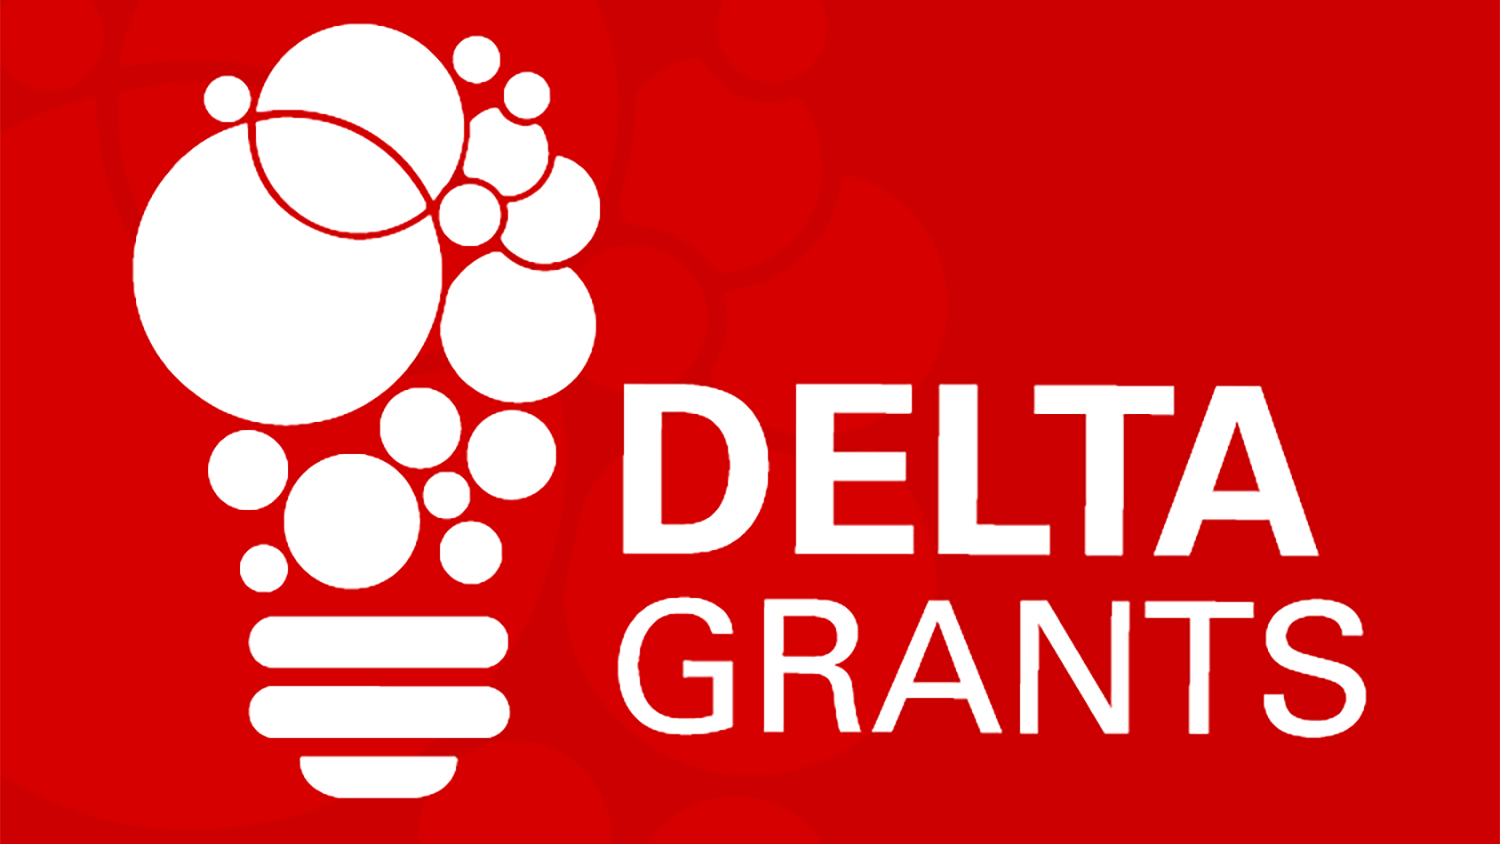 DELTA Grants logo - red background with white text and lightbulb icon.